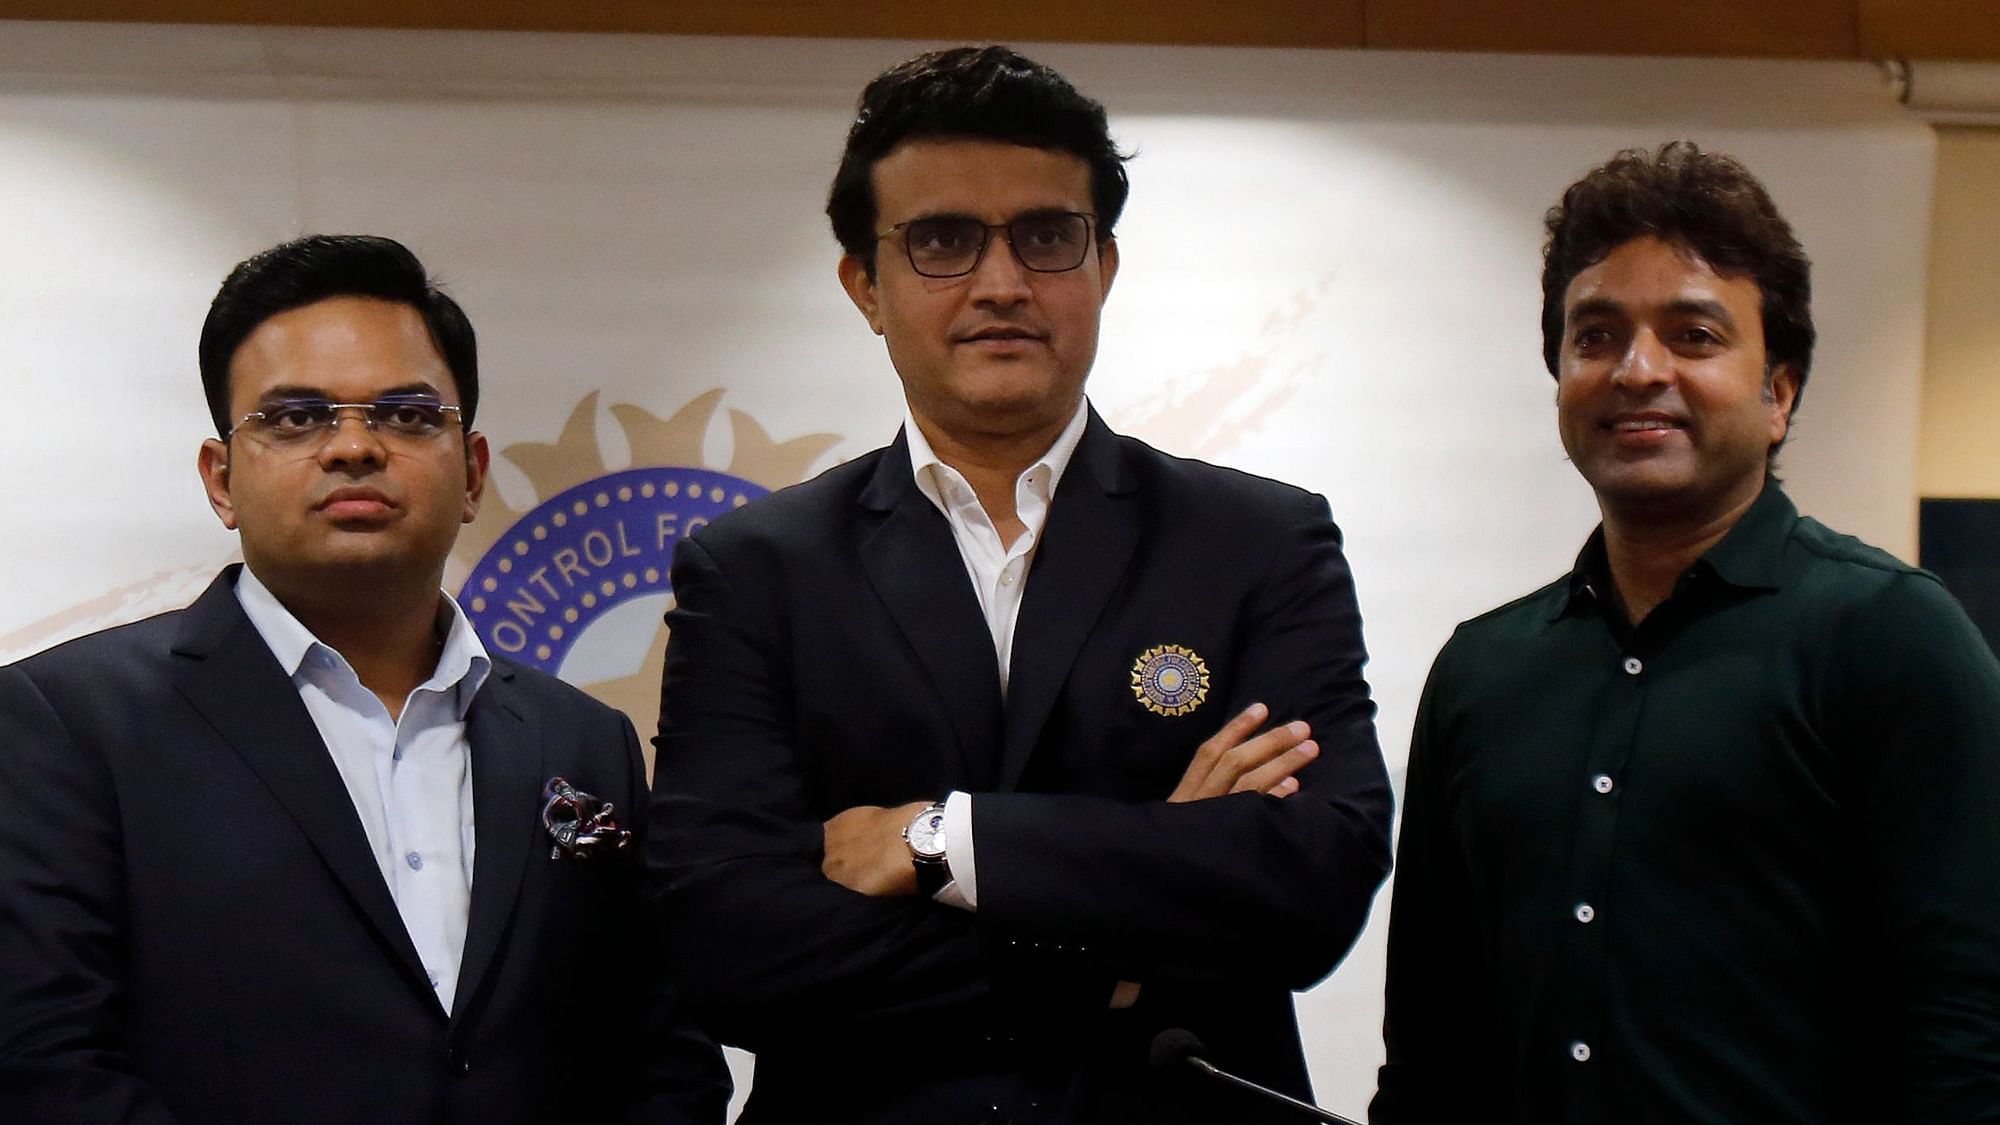 President of the Board of Control for Cricket in India (BCCI) Sourav Ganguly, center, Secretary Jay Shah, left, and Treasurer Arun Dhumal.